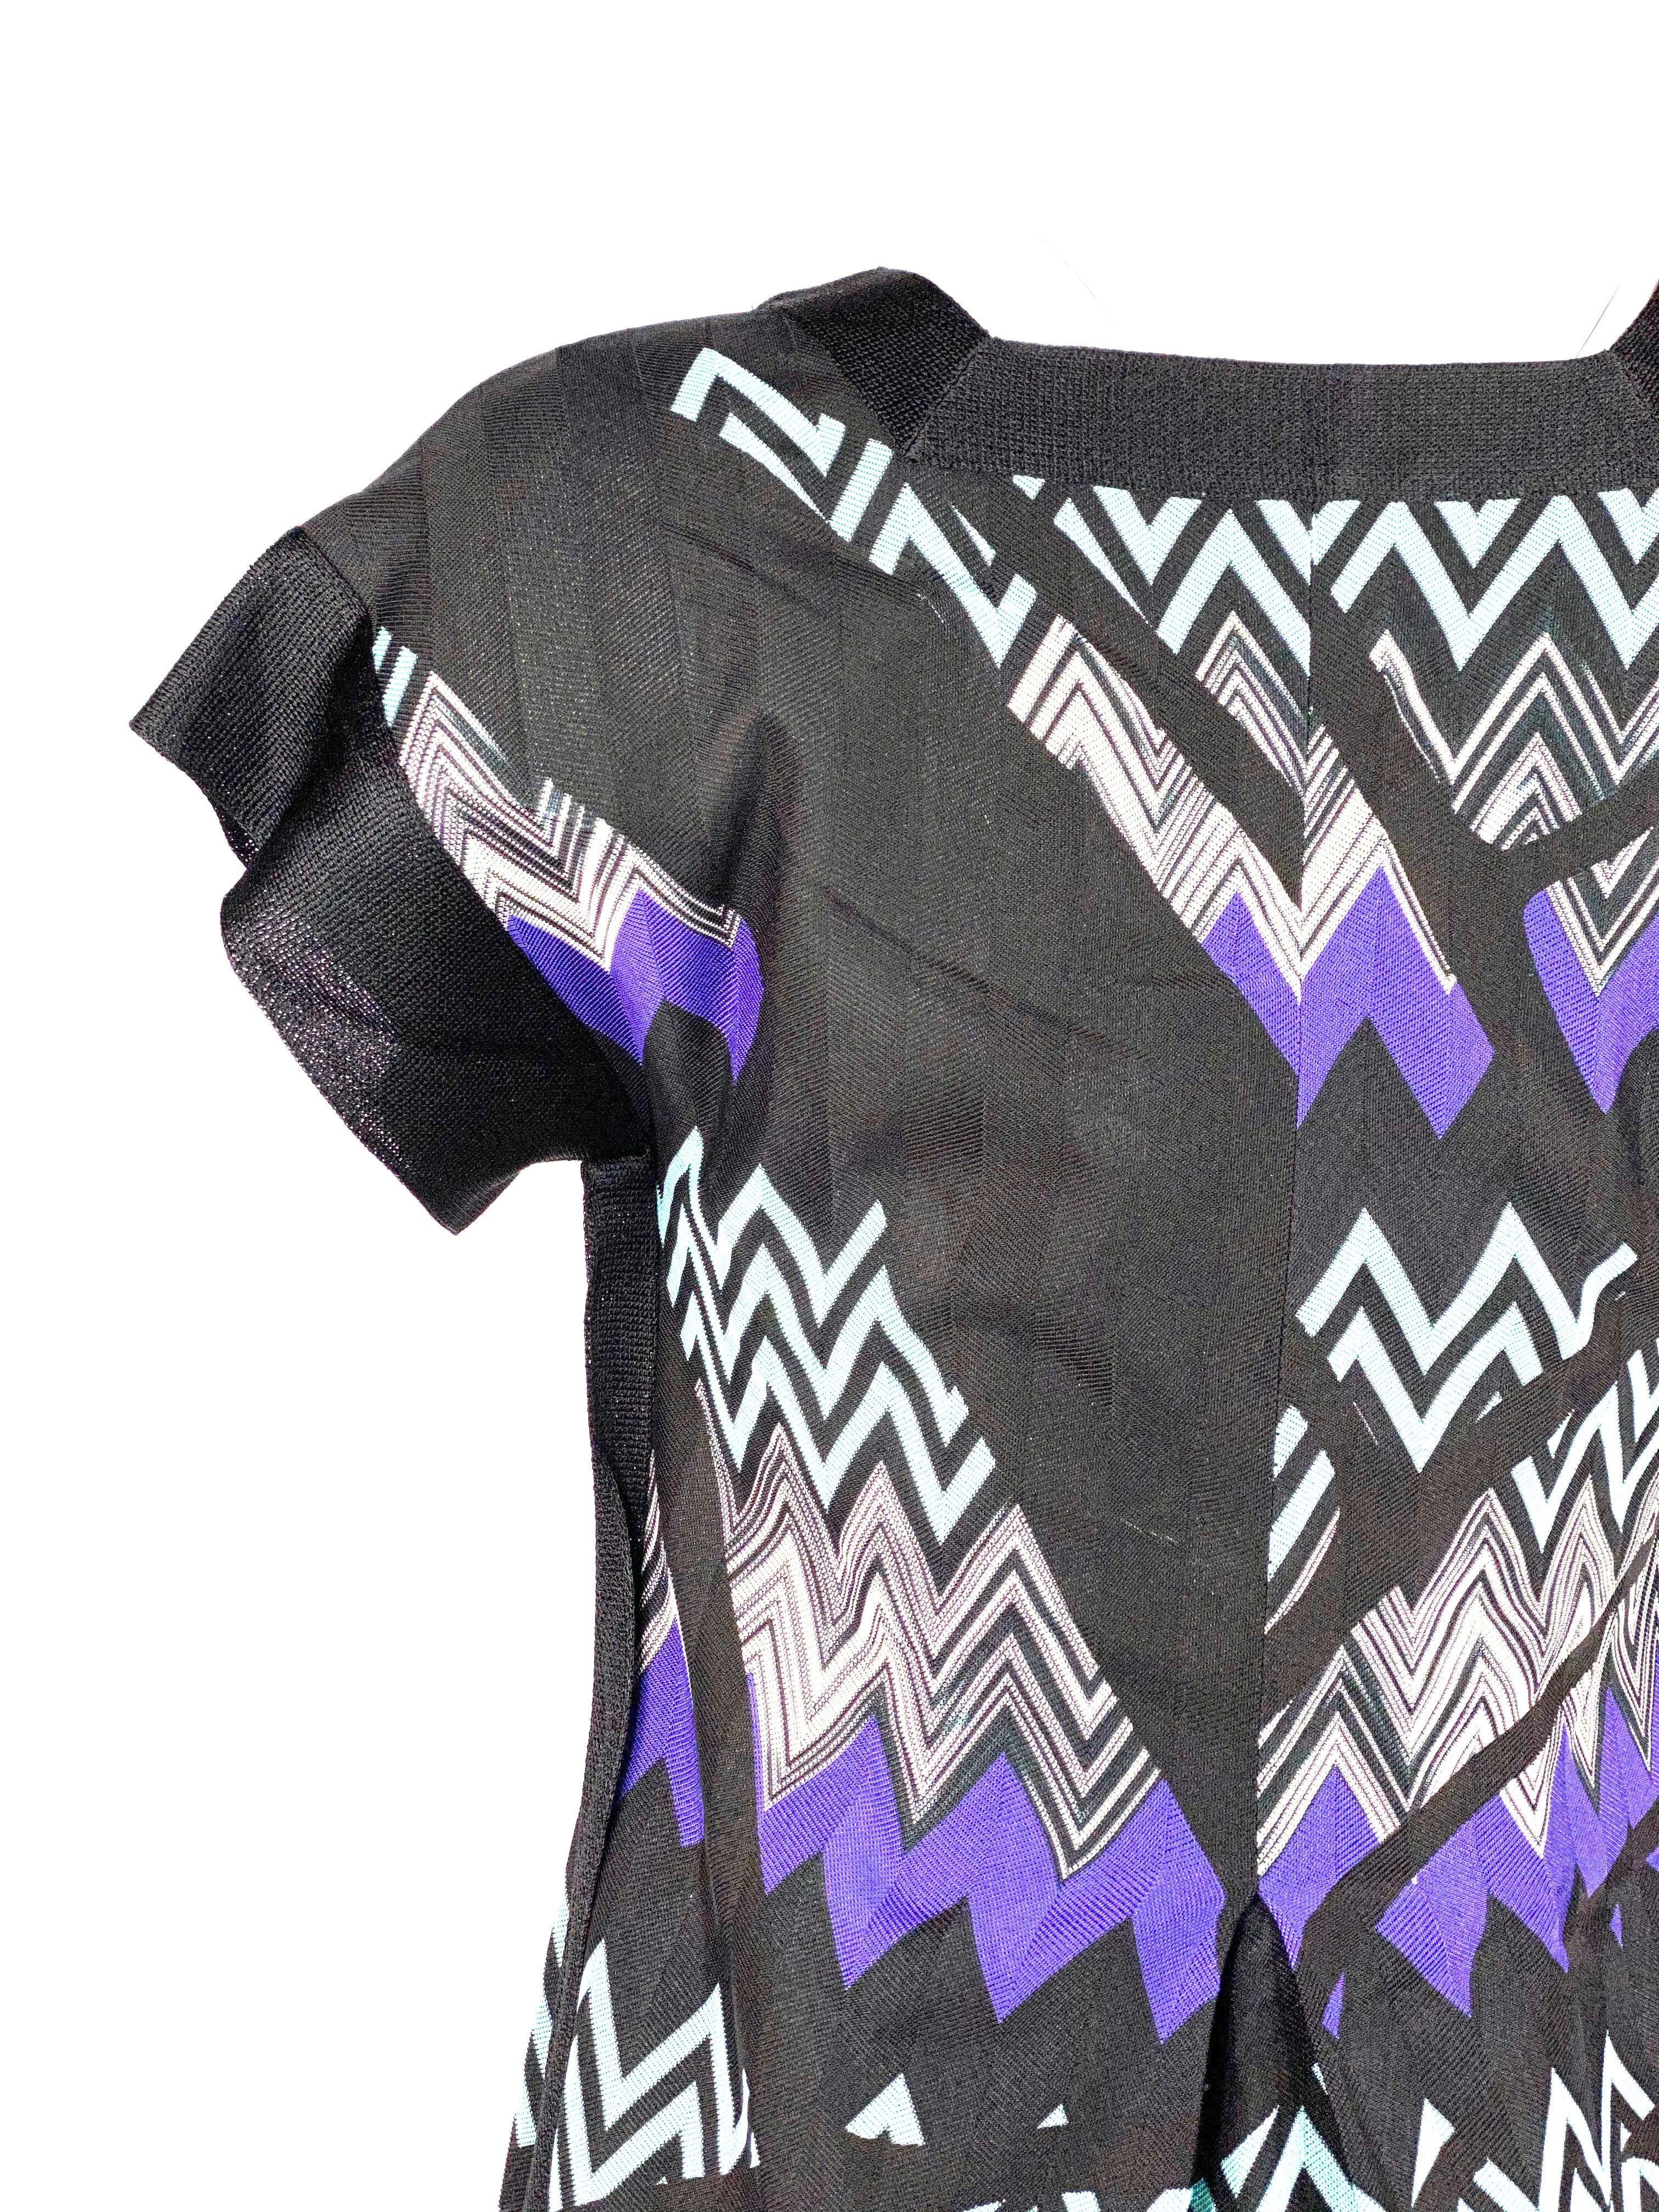 MISSONI Black and Blue Zig Zag V- Neck Short Sleeves Mini Dress In Excellent Condition For Sale In Beverly Hills, CA